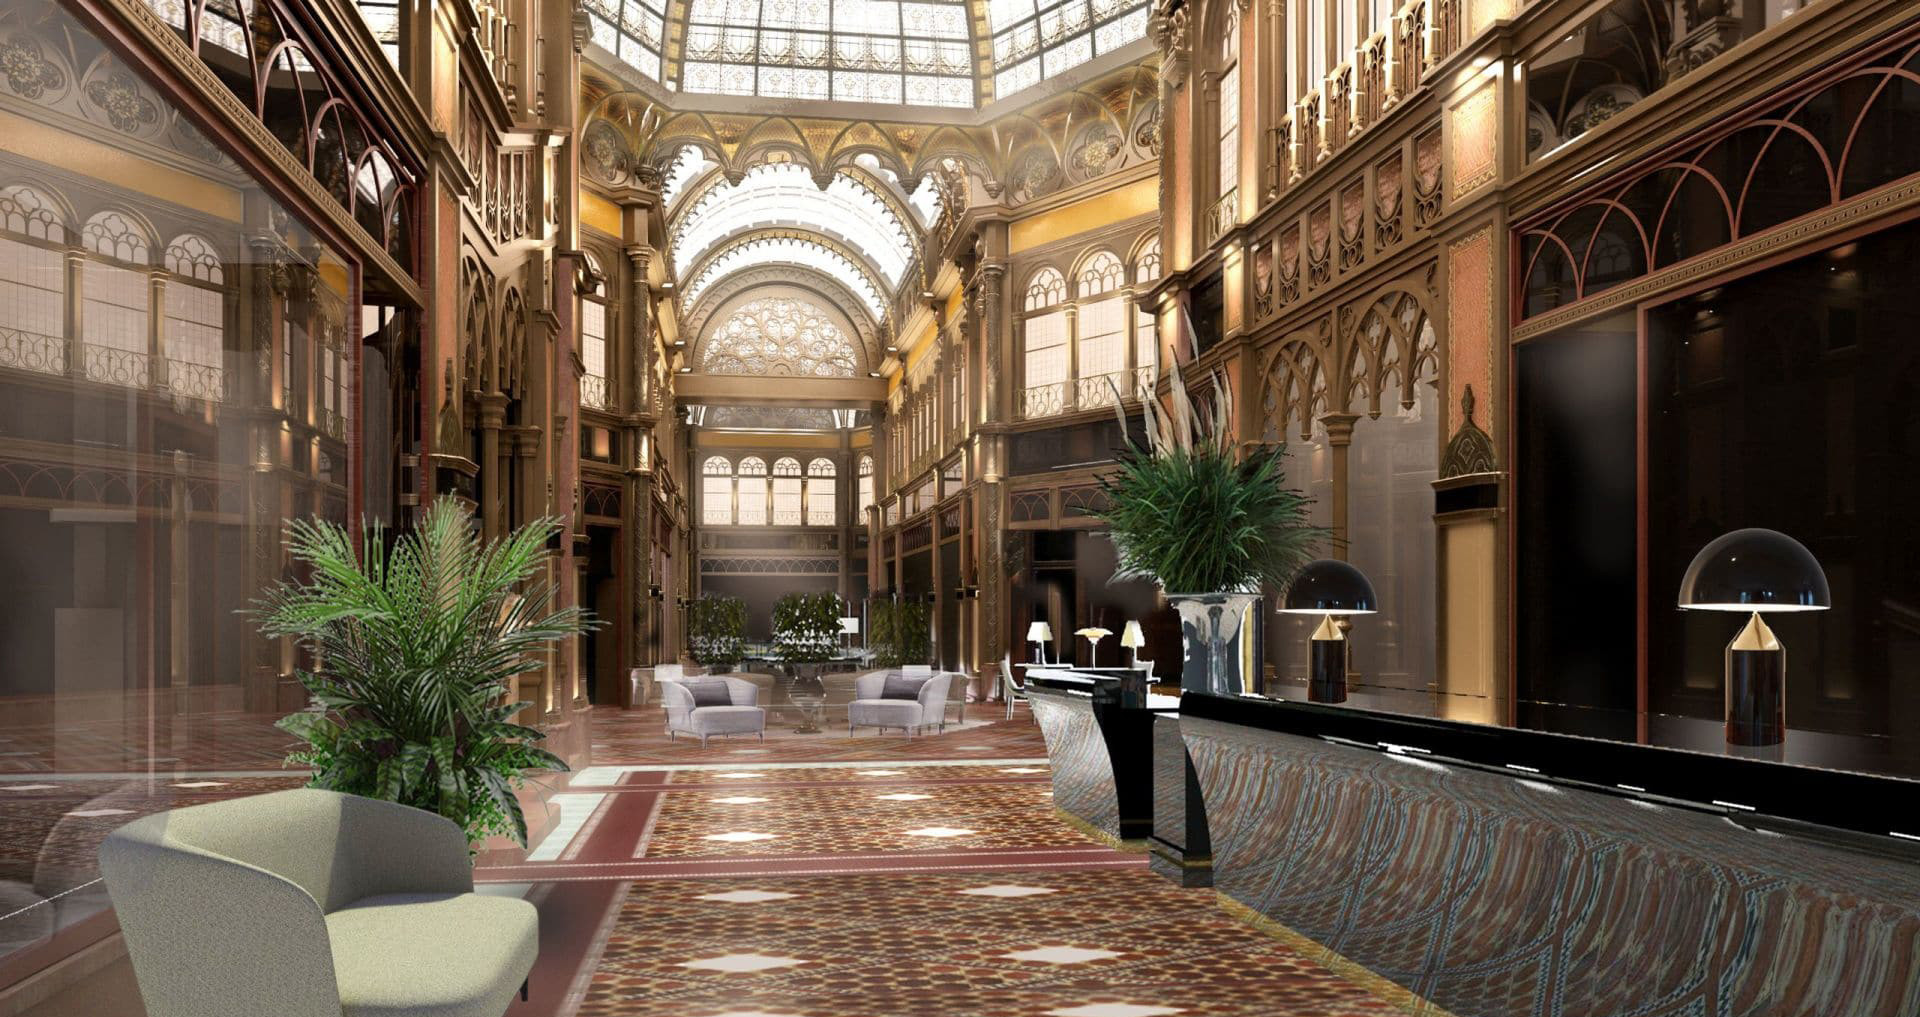 news-main-parisi-udvar-hotel-budapest-officially-joins-the-unbound-collection-by-hyatt.1559824452.jpg